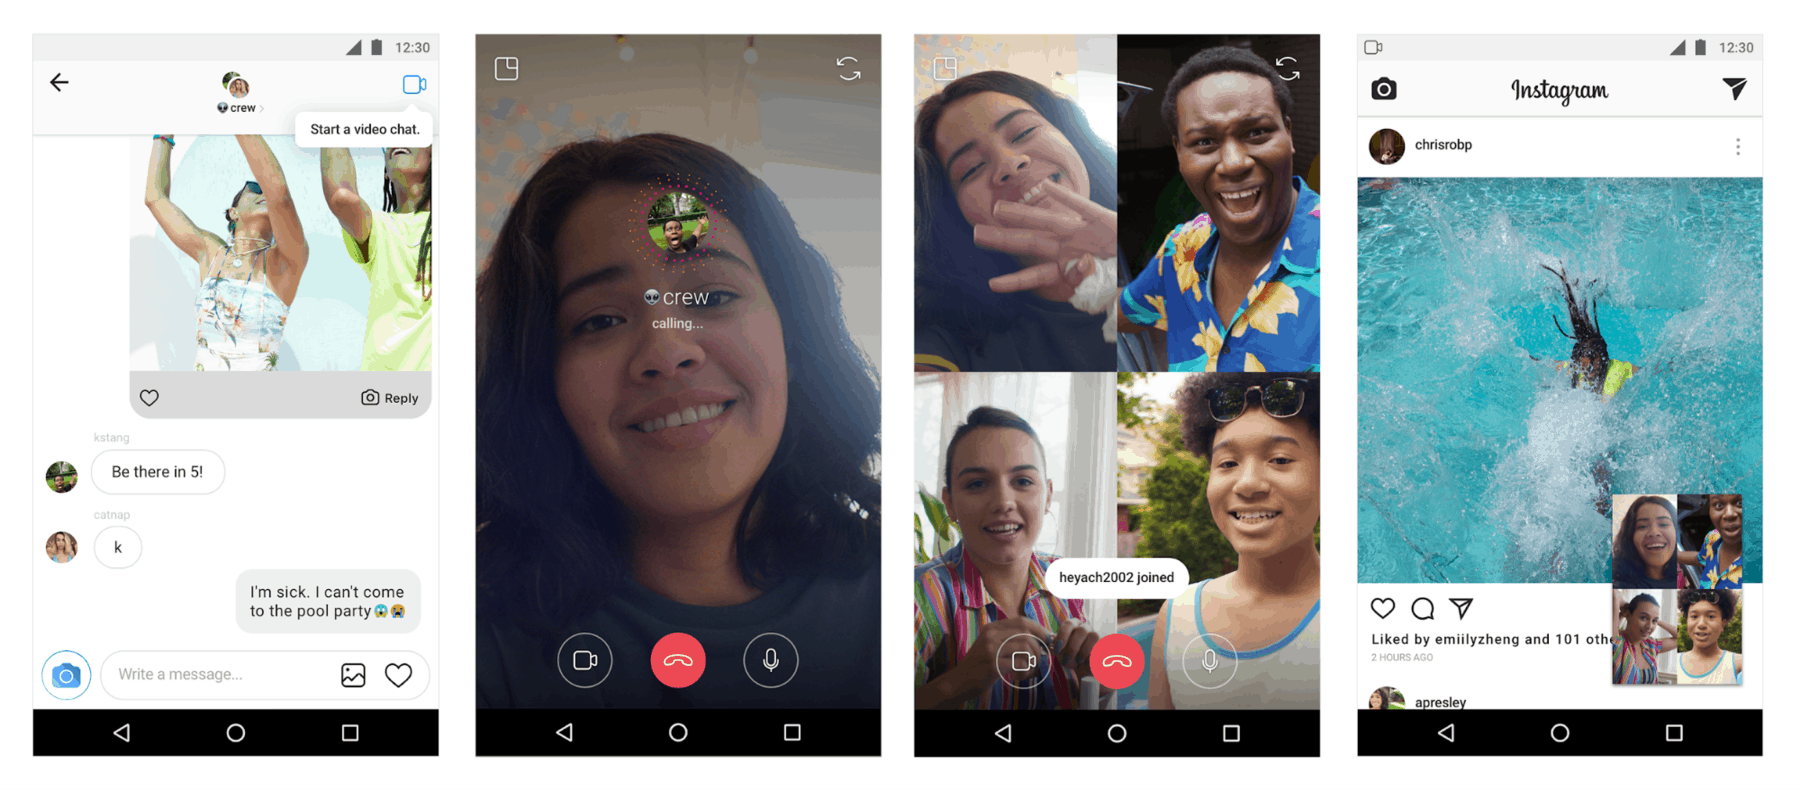 Instagram Video Call: How to Video Call on Instagram | DeviceDaily.com